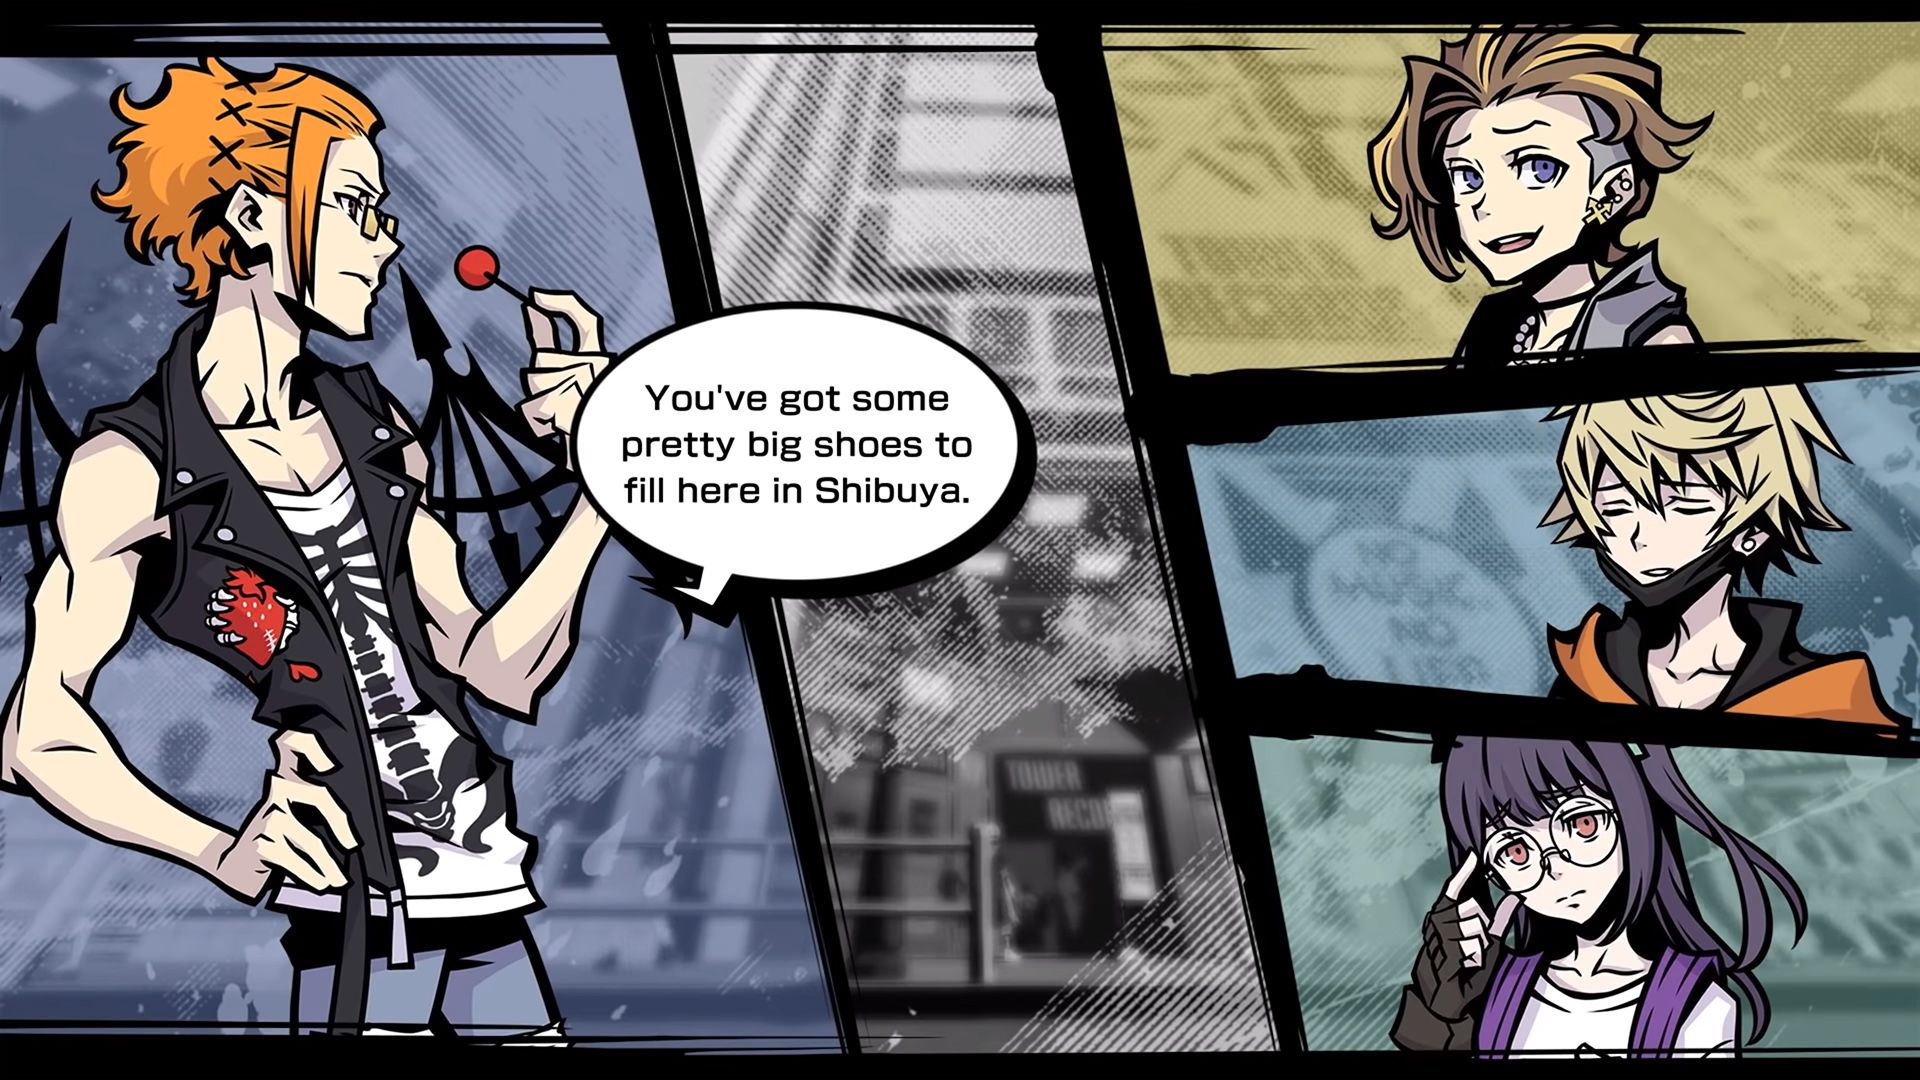 New NEO: The World Ends With You trailer reveals new characters and some familiar ones, coming July 27th